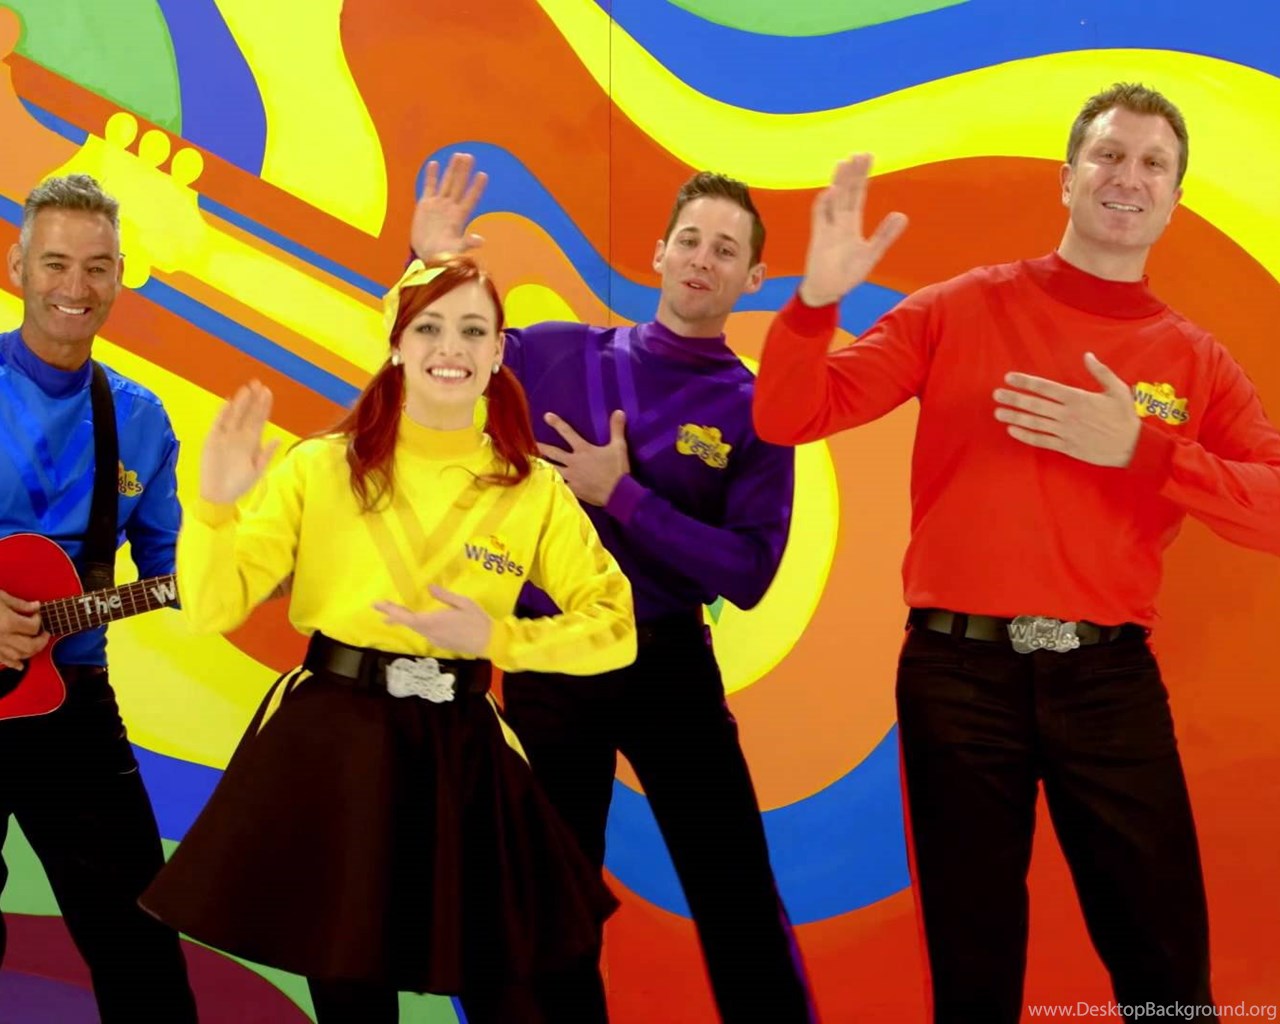 Download The Wiggles Performing "Waltzing Matilda" For Australia ...